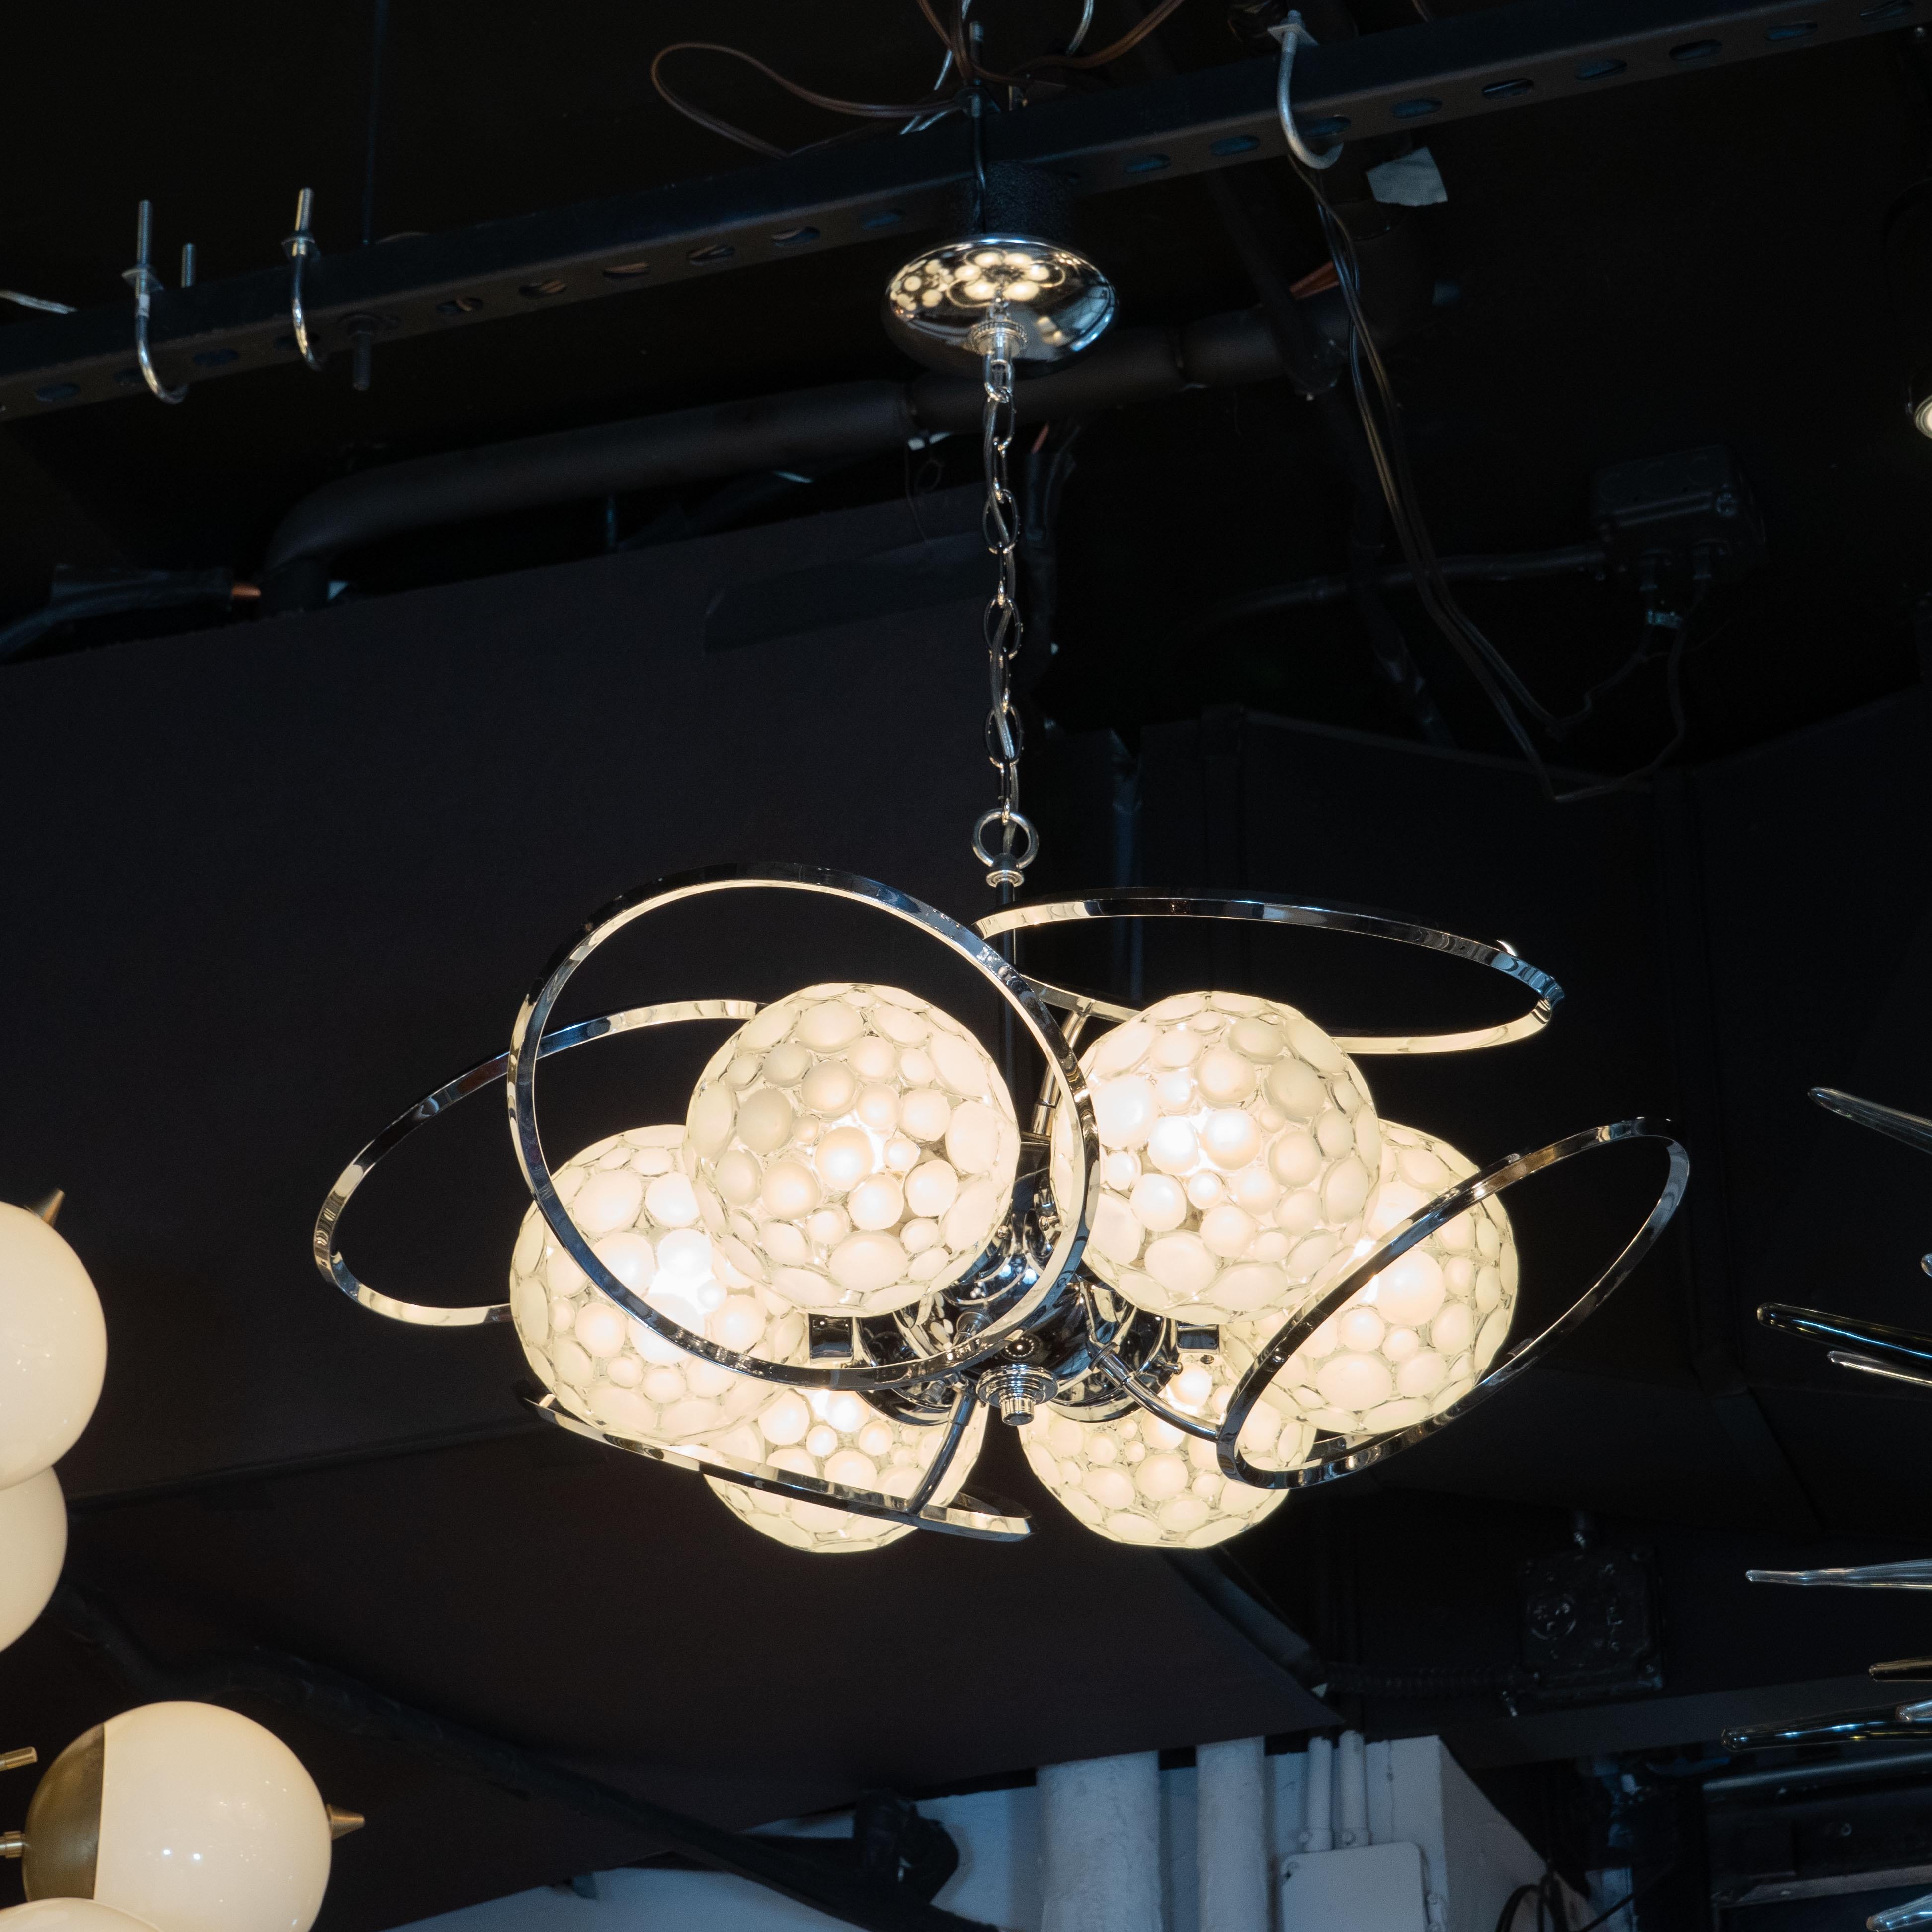 This graphic and sculptural Mid-Century Modern chandelier was realized in the United States circa 1960. It offers six orbital globes adorned with an abundance of concave white glass embellishments surrounded by curvilinear chrome forms resembling